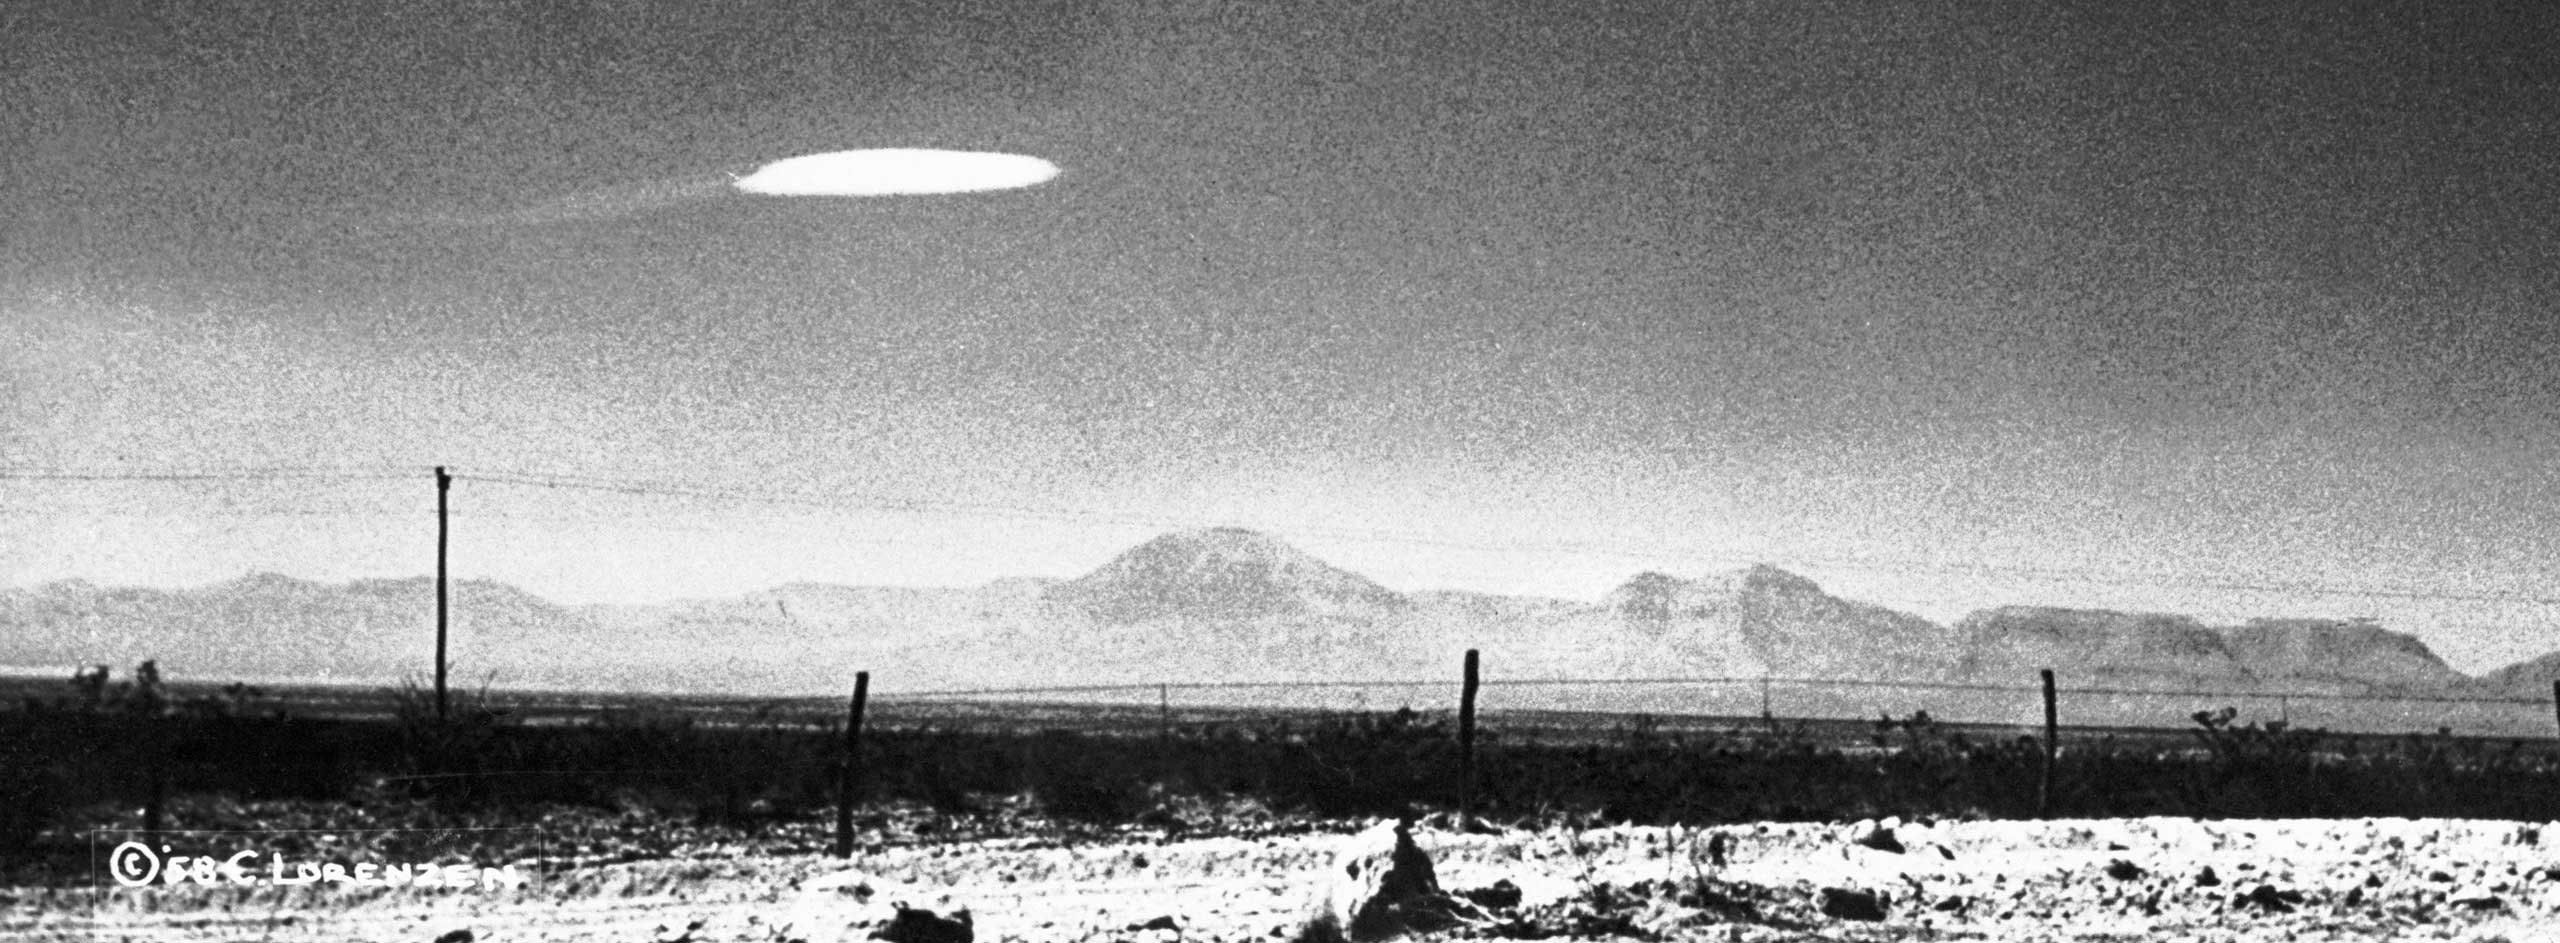 This photo was taken by Ella Fortune near the Holloman North Test Range in New Mexico, while driving along Highway 54. The object appeared motionless and there was no wind at the time. Skeptics believe this may have been a lenticular cloud, however, Ella Fortune was convinced this object was a UFO.